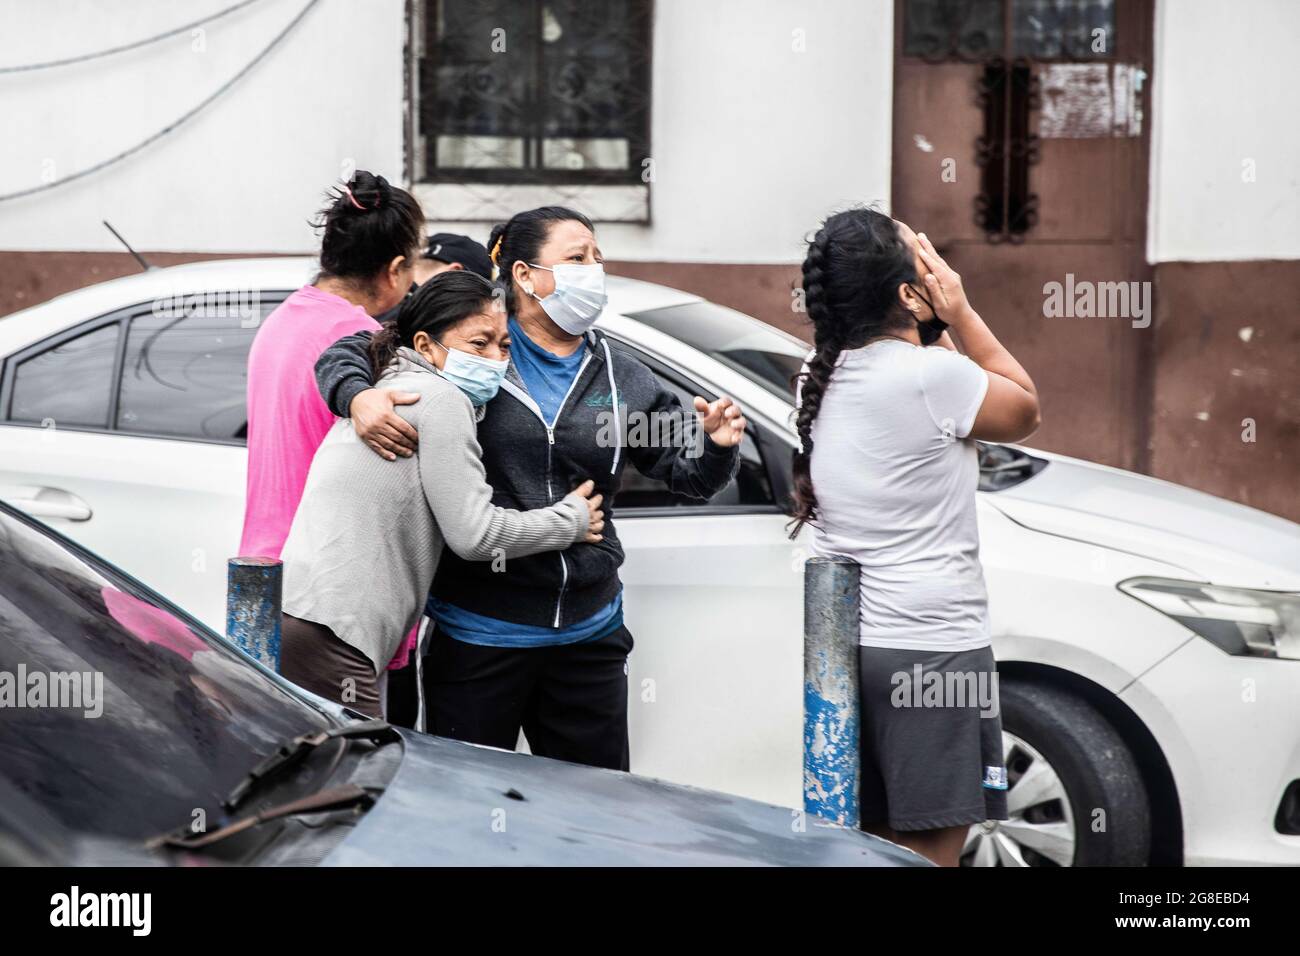 Guatemala City, Guatemala. 14th July, 2021. Life and Death in Guatemala. Gang problem and thug life of the lifeguard volunteers. Family of a member of the 18th street gang cries while he is getting arrested and moved by a large group of the police (Credit Image: © David Tesinsky/ZUMA Press) Stock Photo